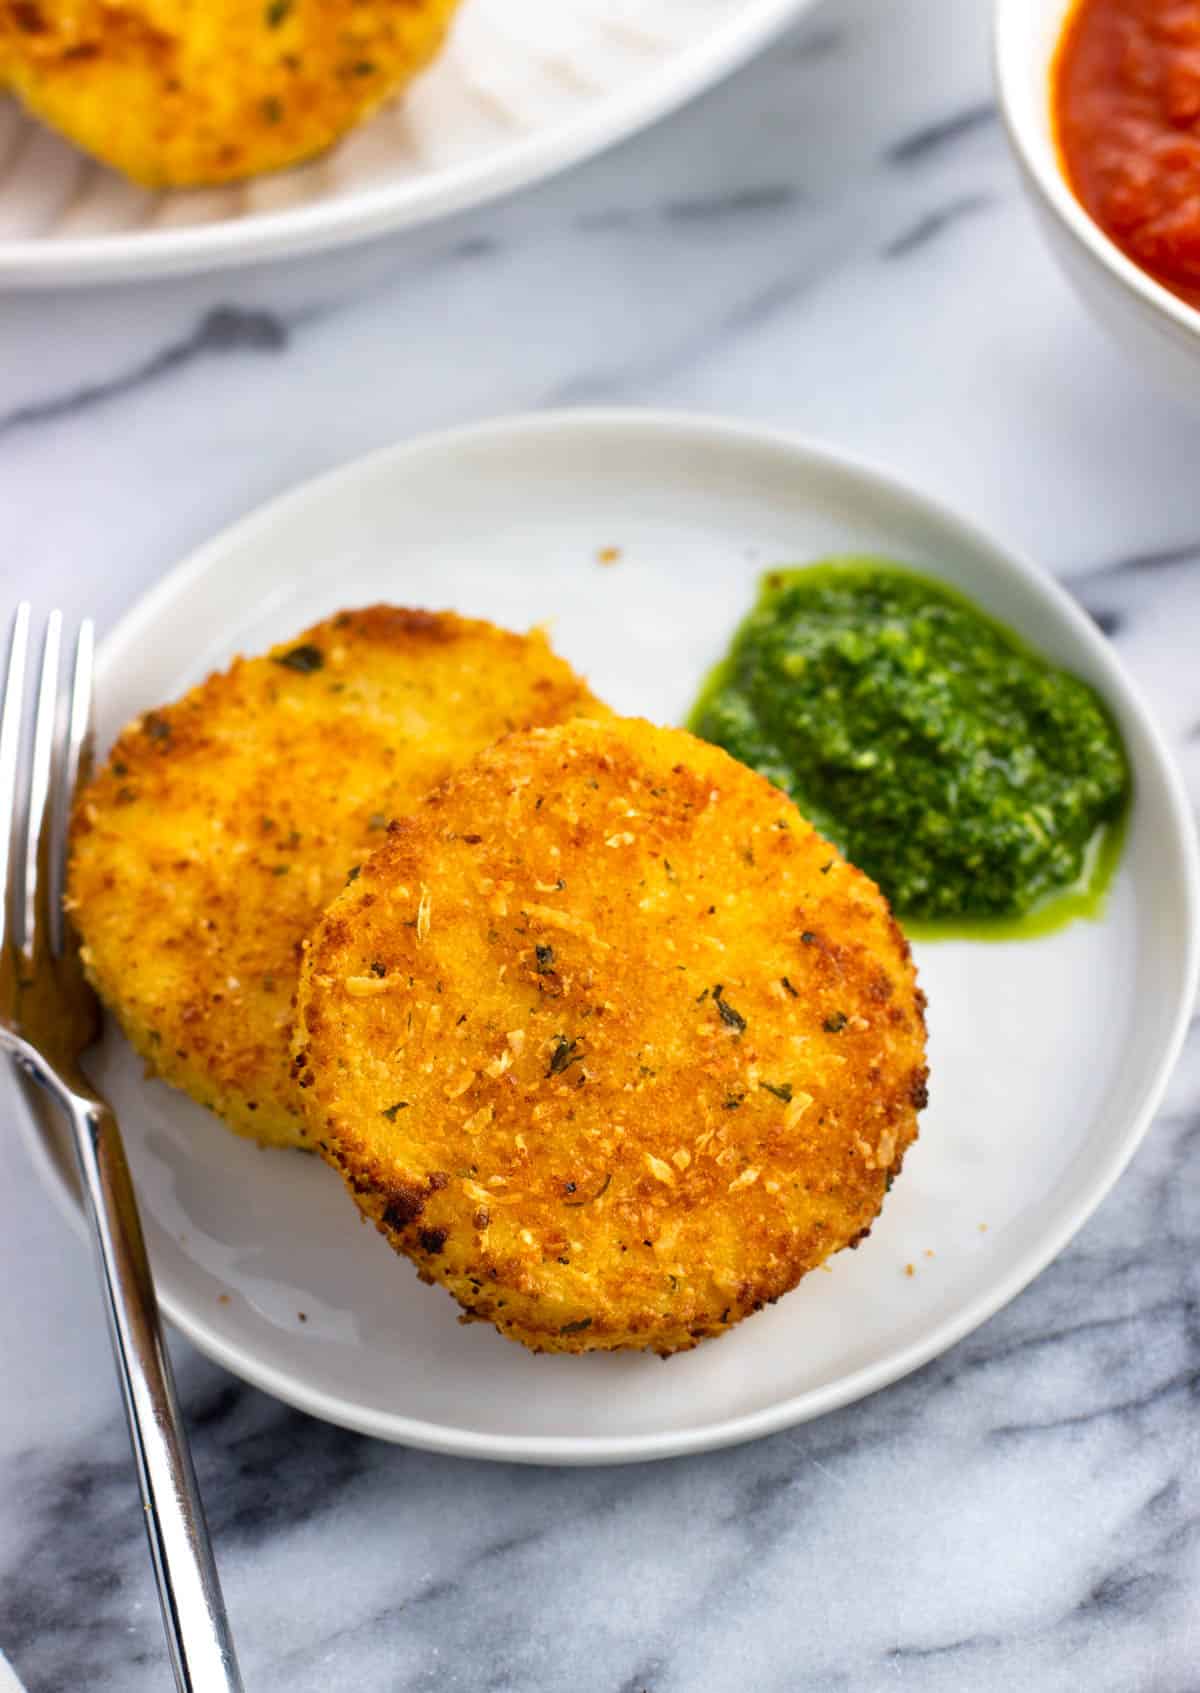 Two fried polenta slices on a plate with a dollop of pesto.